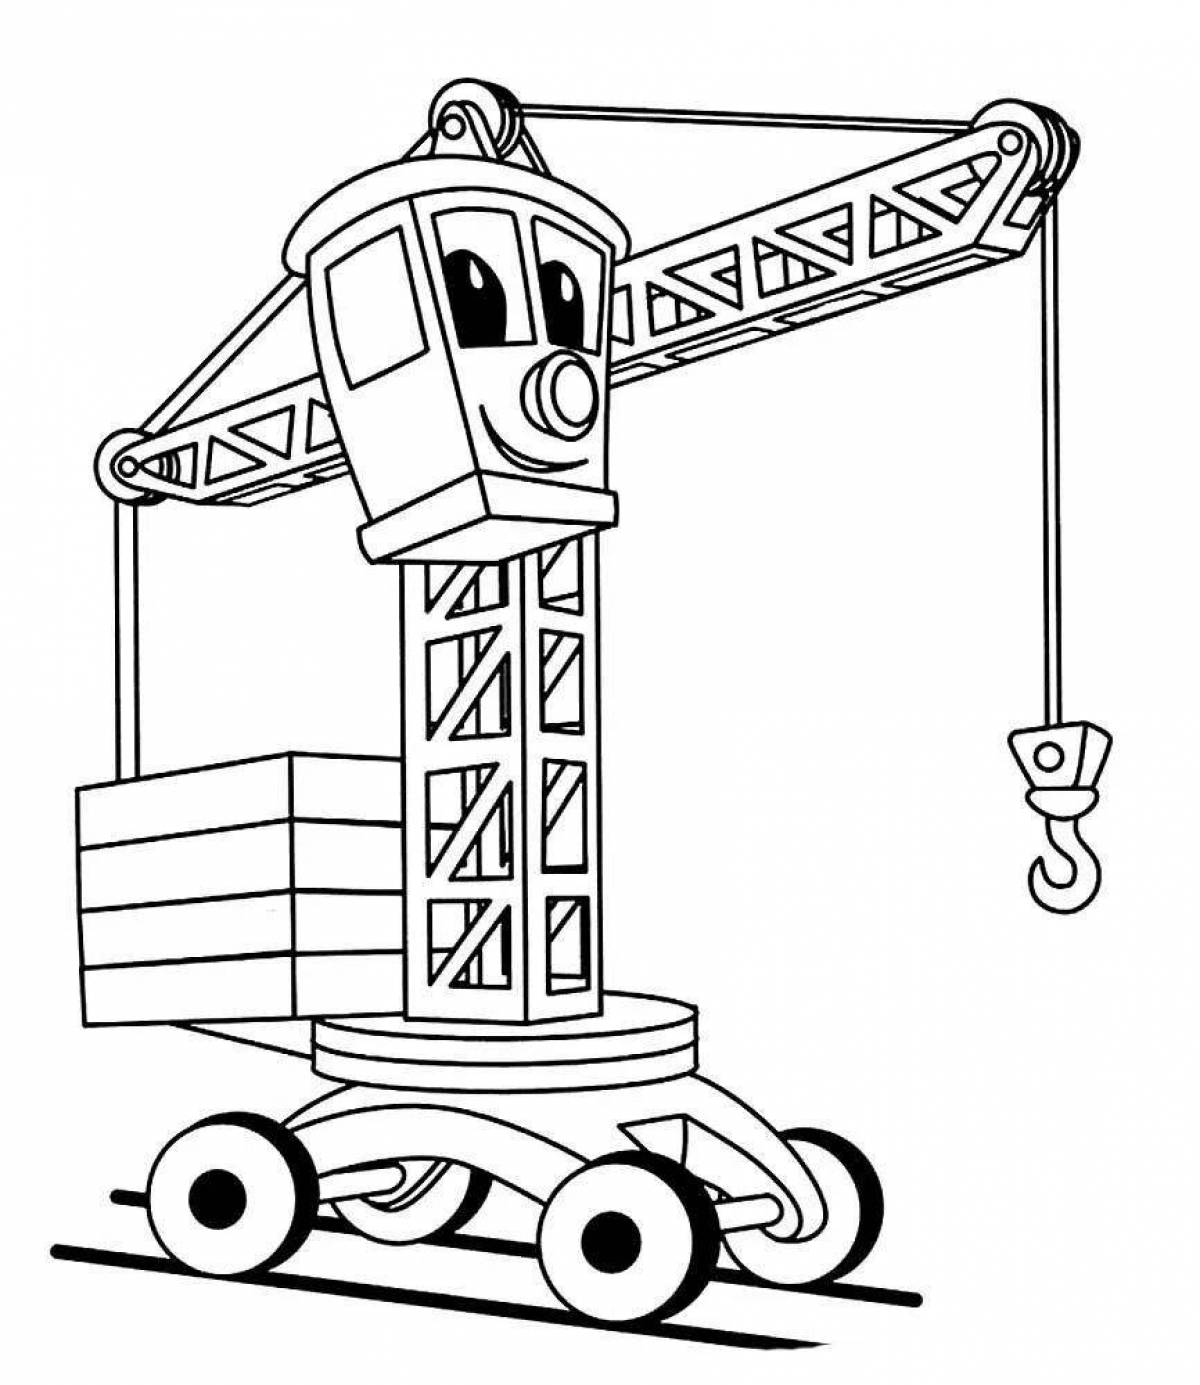 Impressive construction machinery coloring page for boys